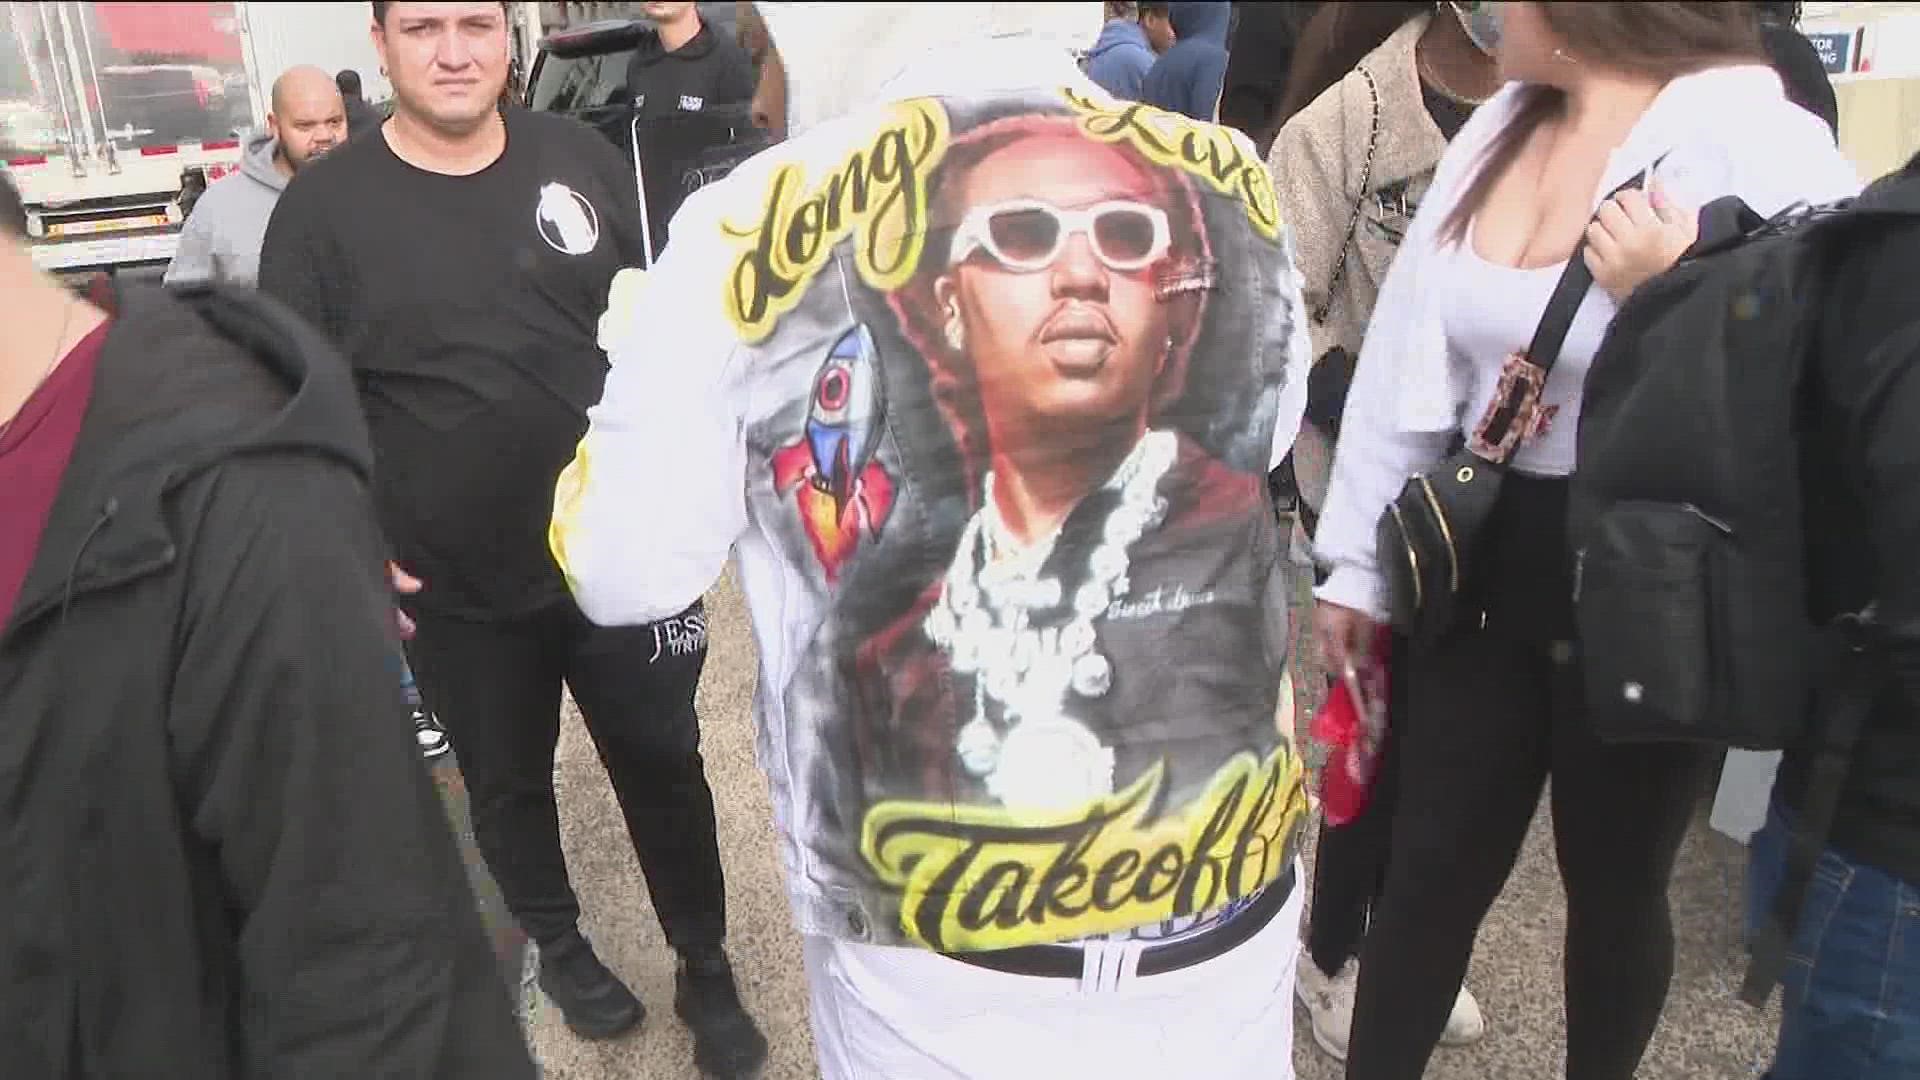 Thousands from around Atlanta, the country and even the world gathered at State Farm Arena to remember the Migos rapper TakeOff.